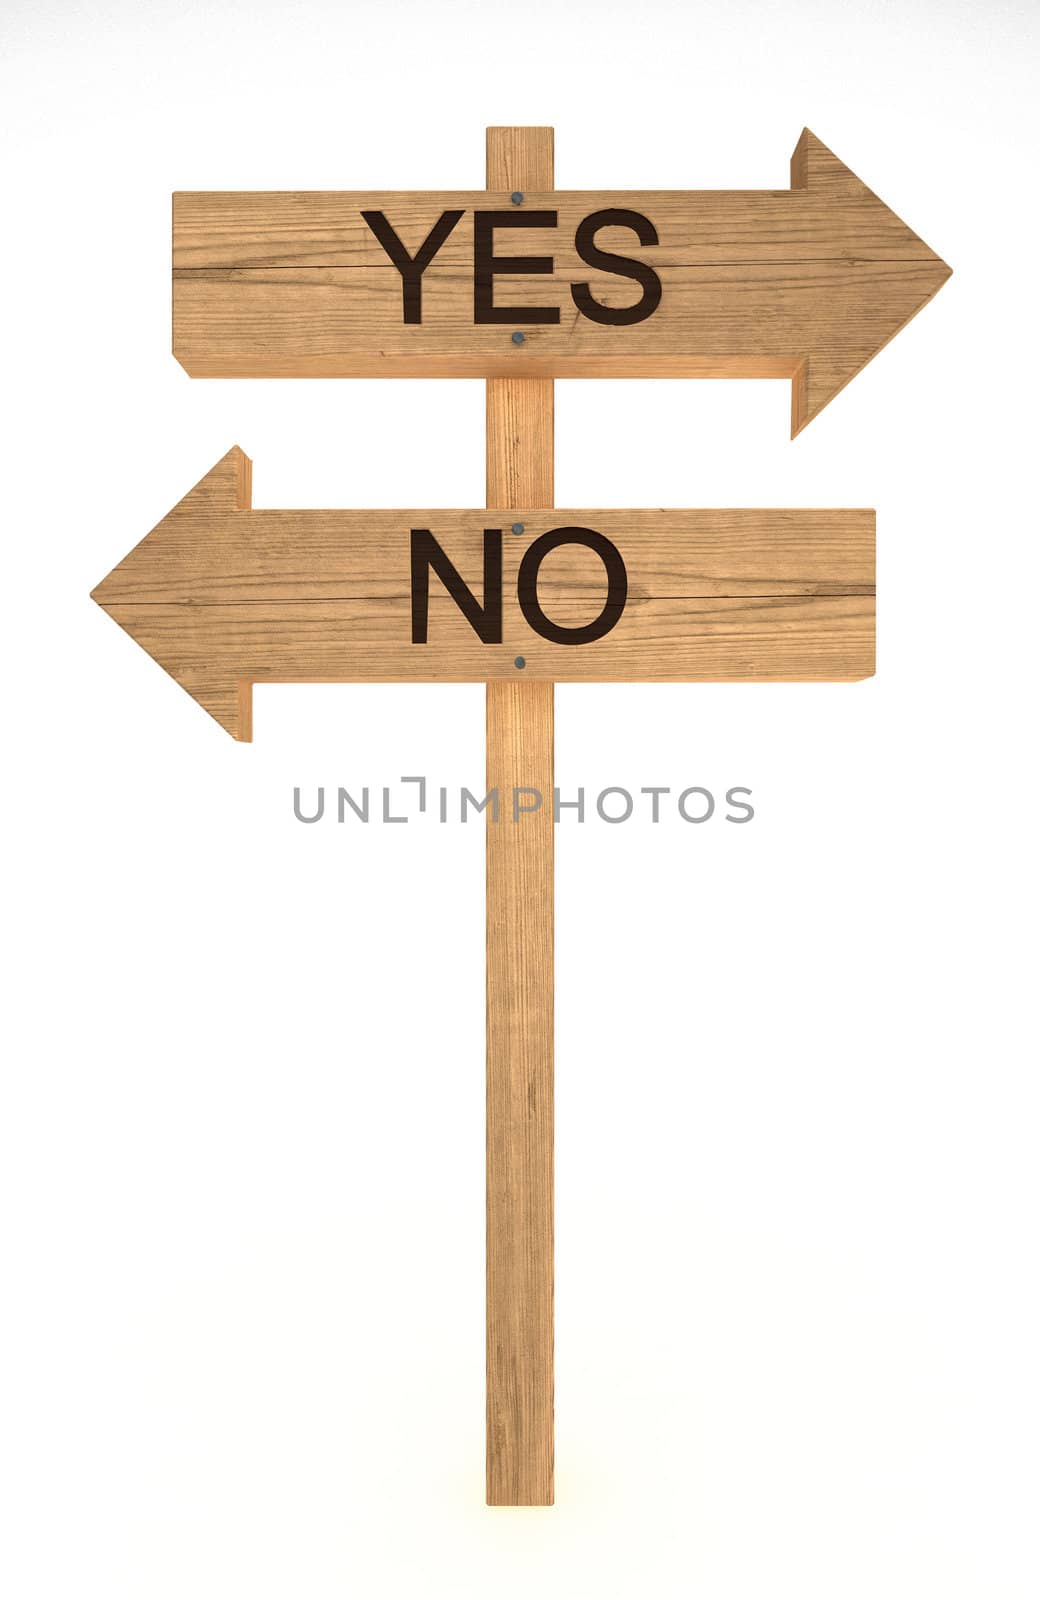 Old wood direction sign with yes and no text